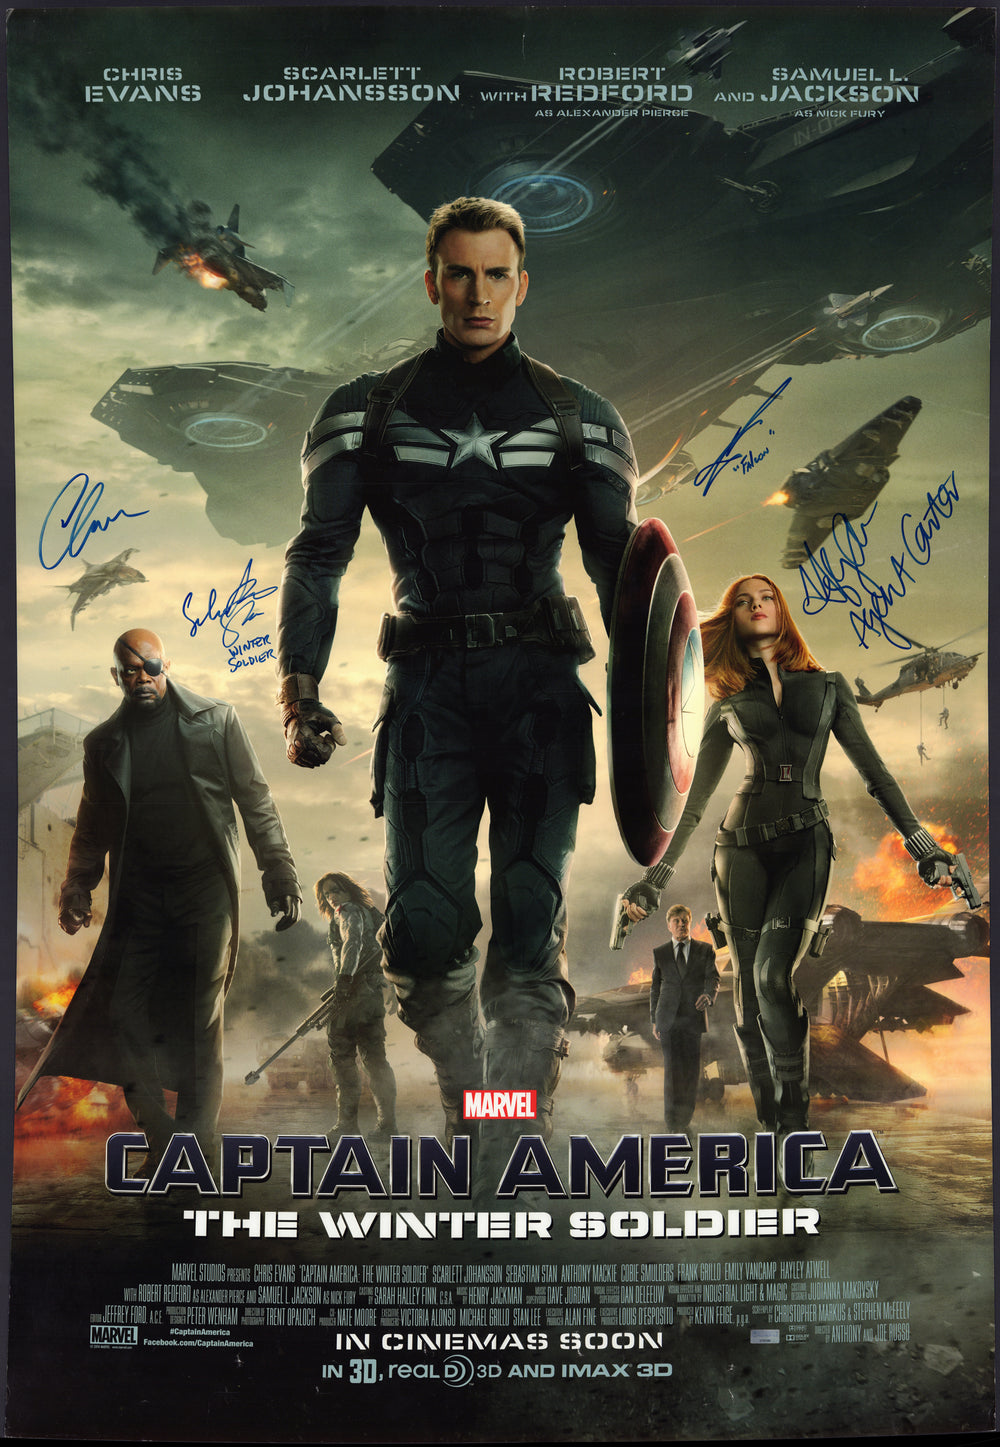 Captain America: The Winter Soldier 27x40 Poster (Celebrity Authentics) Signed by Chris Evans, Sebastian Stan, Anthony Mackie, and Hayley Atwell